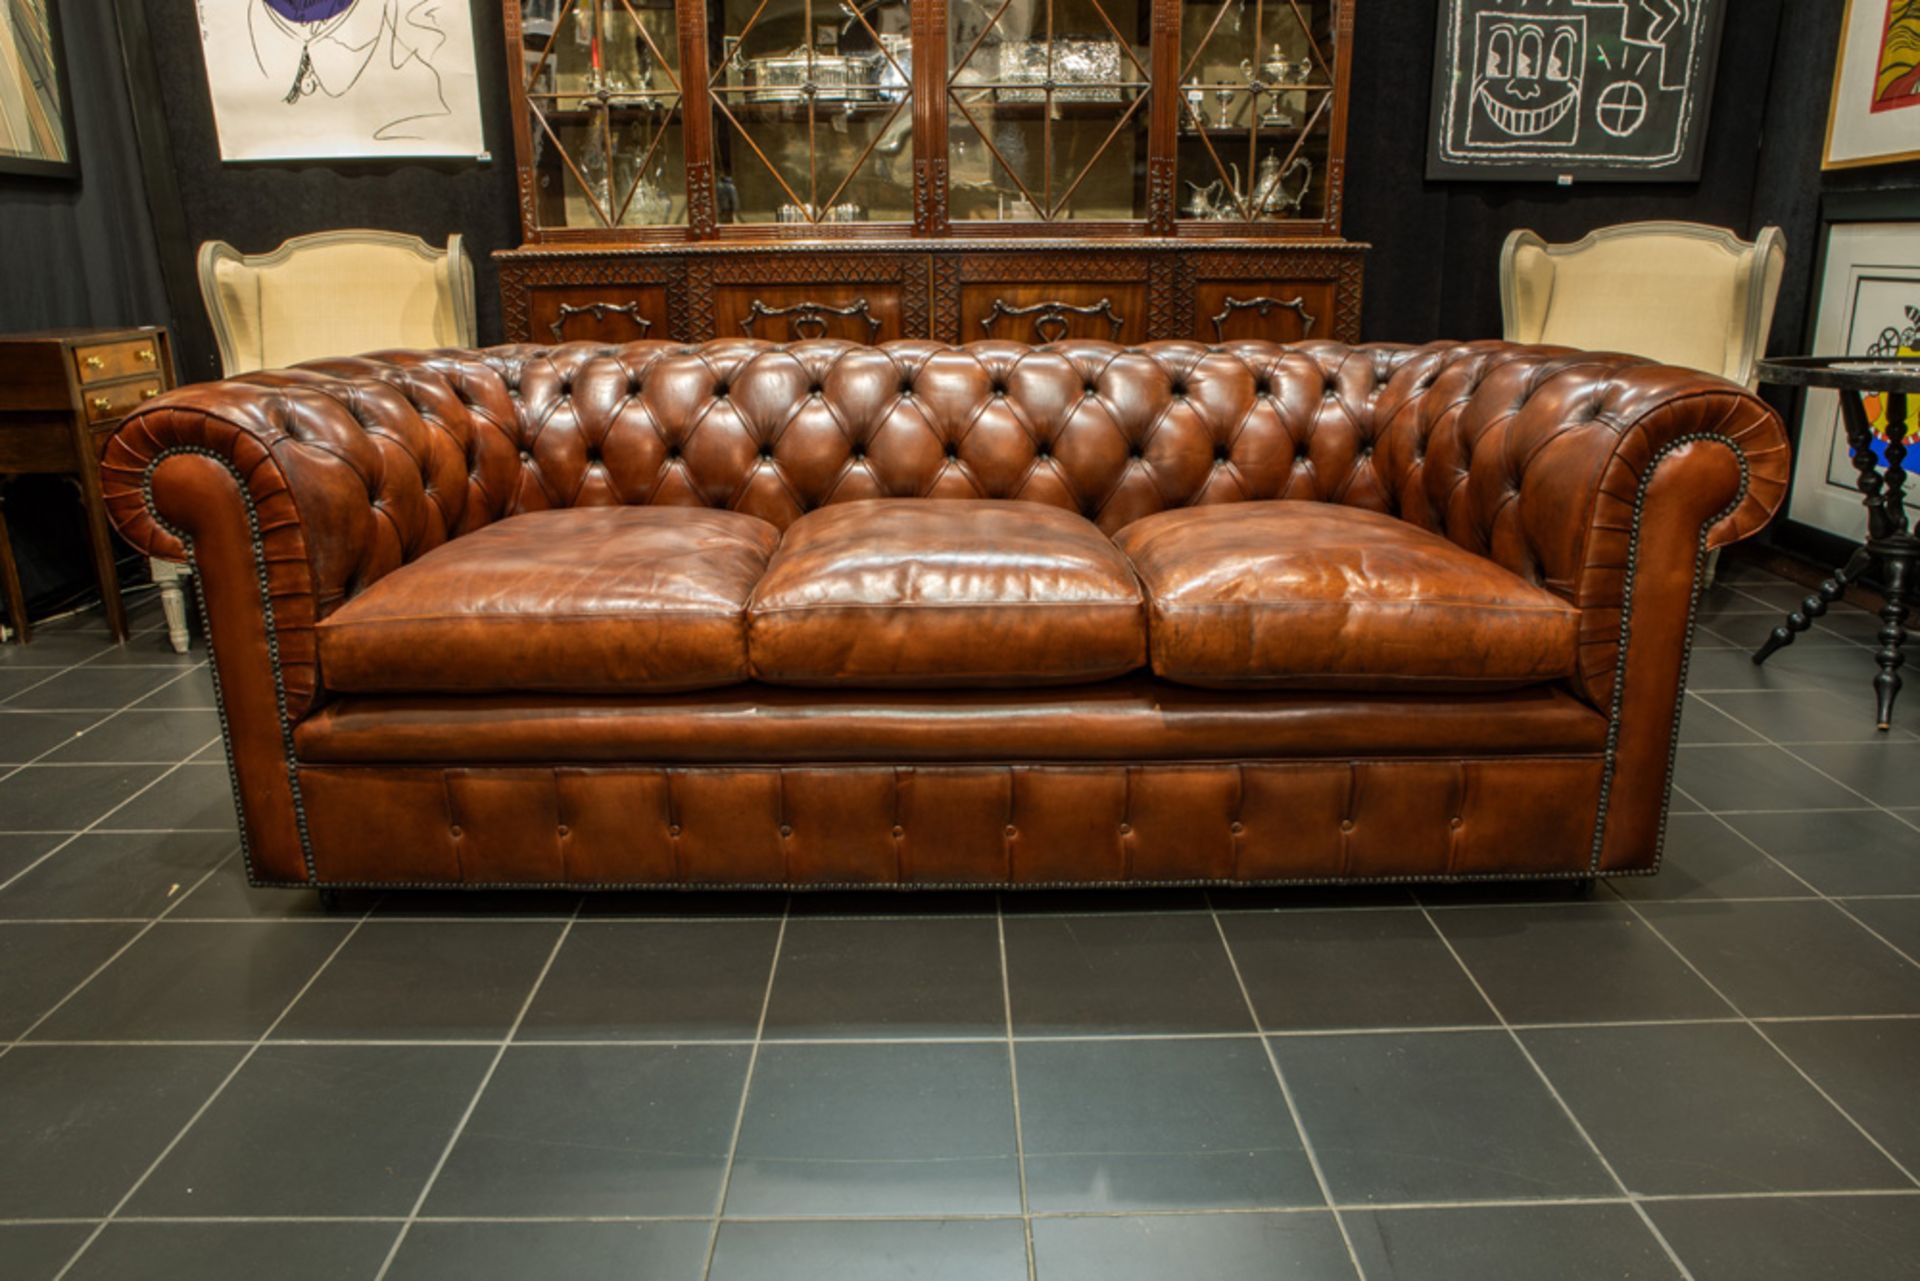 leather Chesterfield sofa || Chesterfield driezitcanapé in leder